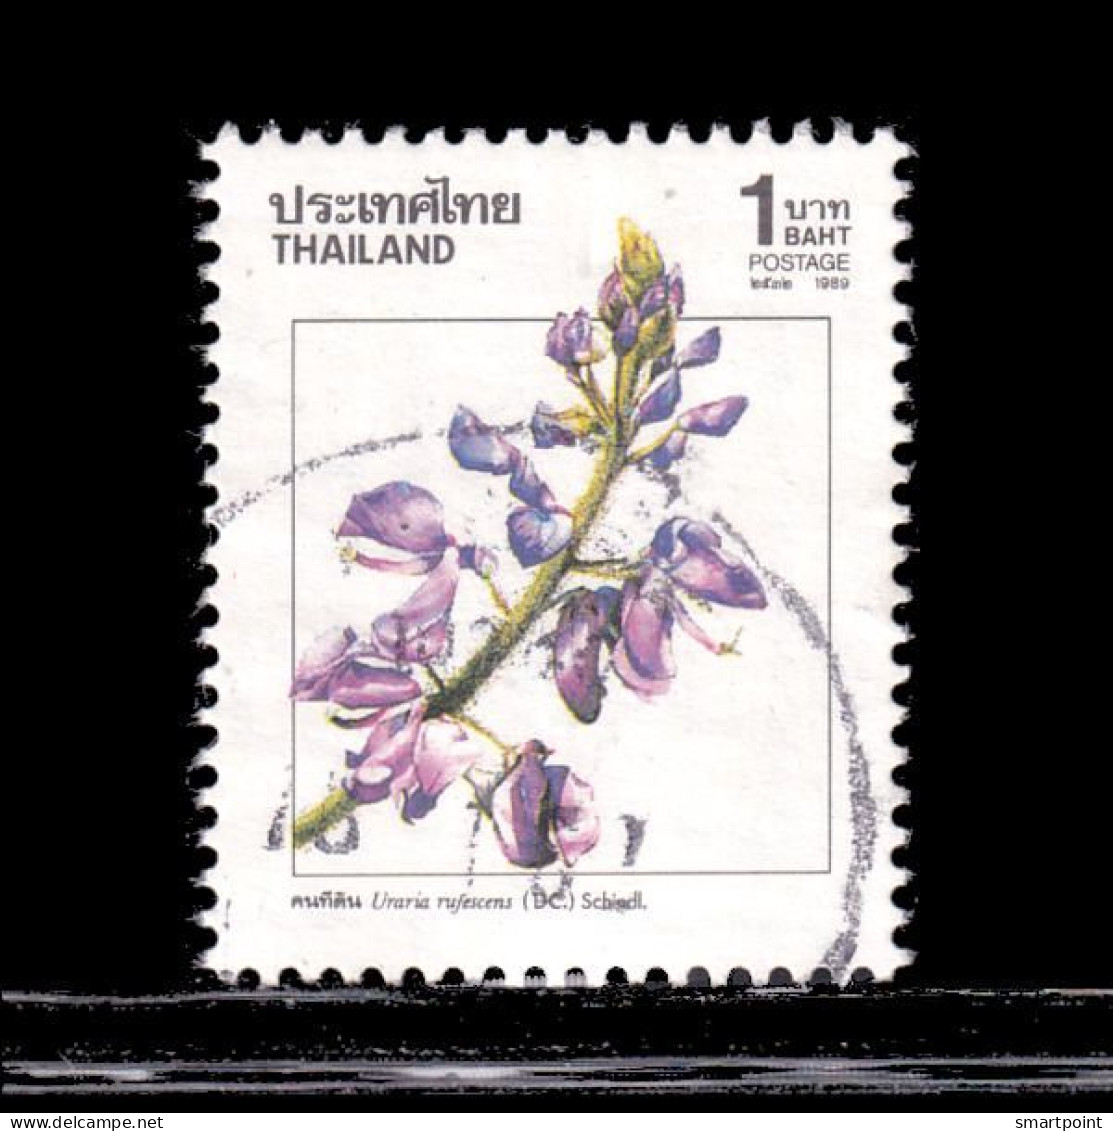 Thailand Stamp 1989 1990 New Year (2nd Series) 1 Baht - Used - Thailand